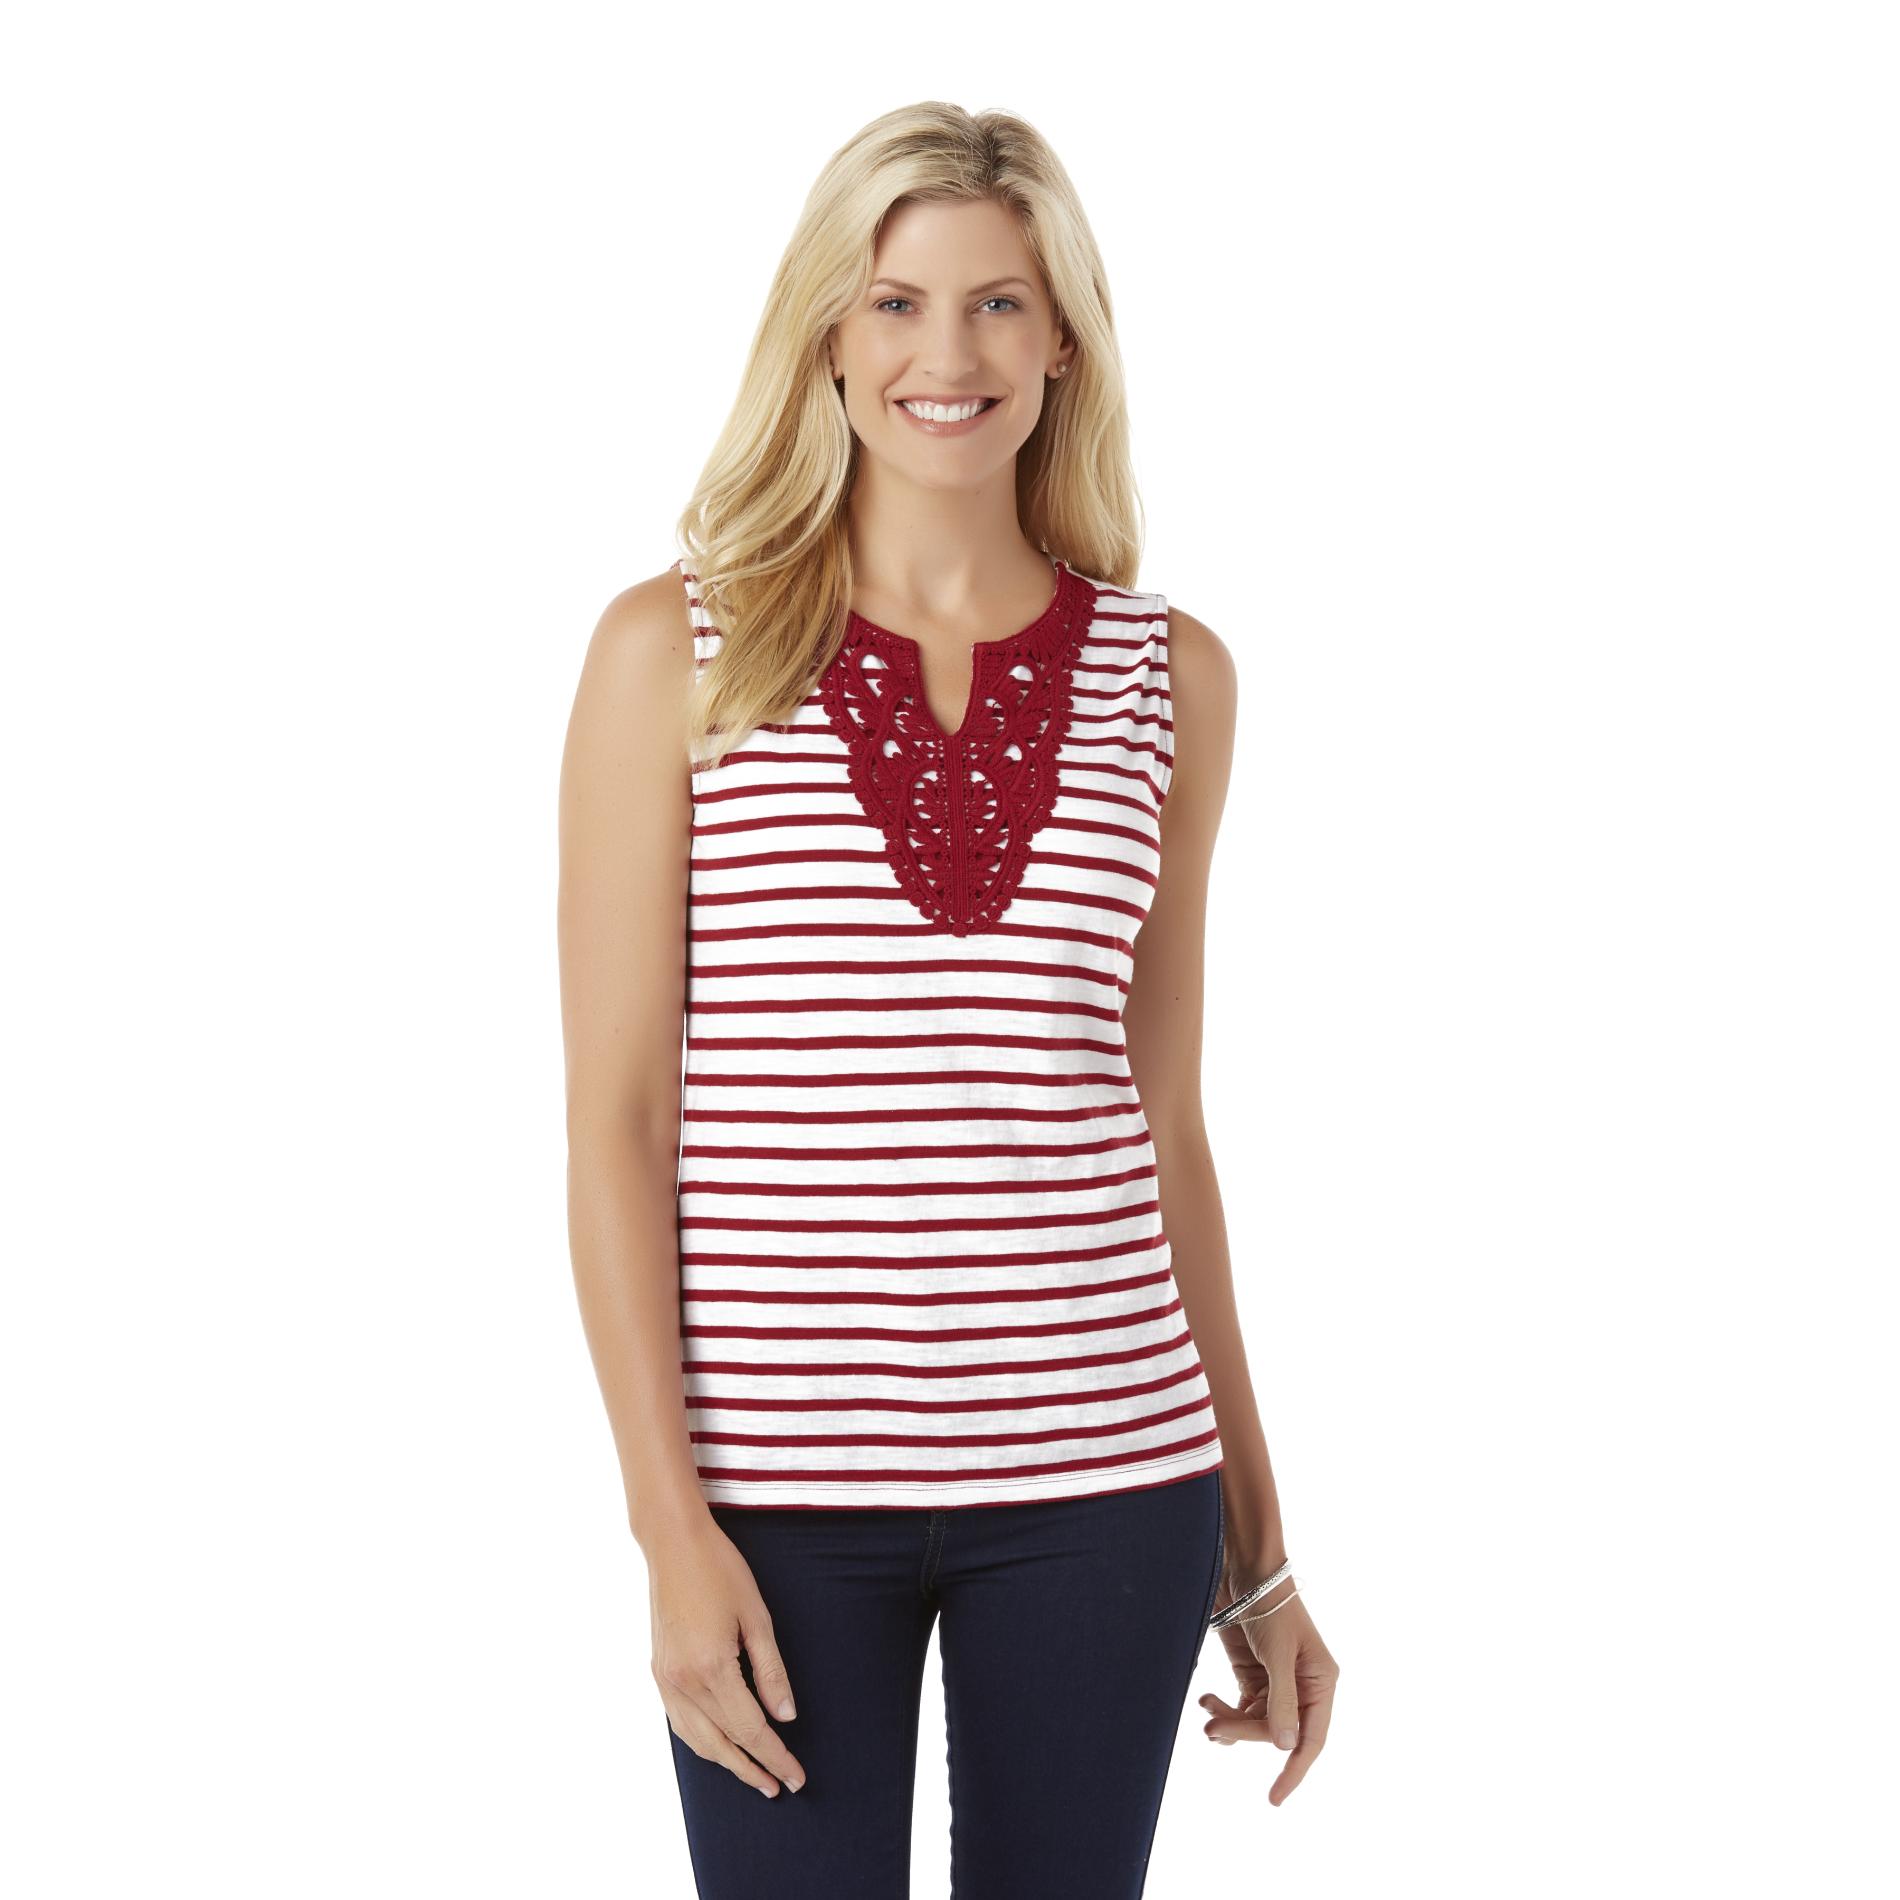 Basic Editions Women's Embellished Sleeveless Top - Striped